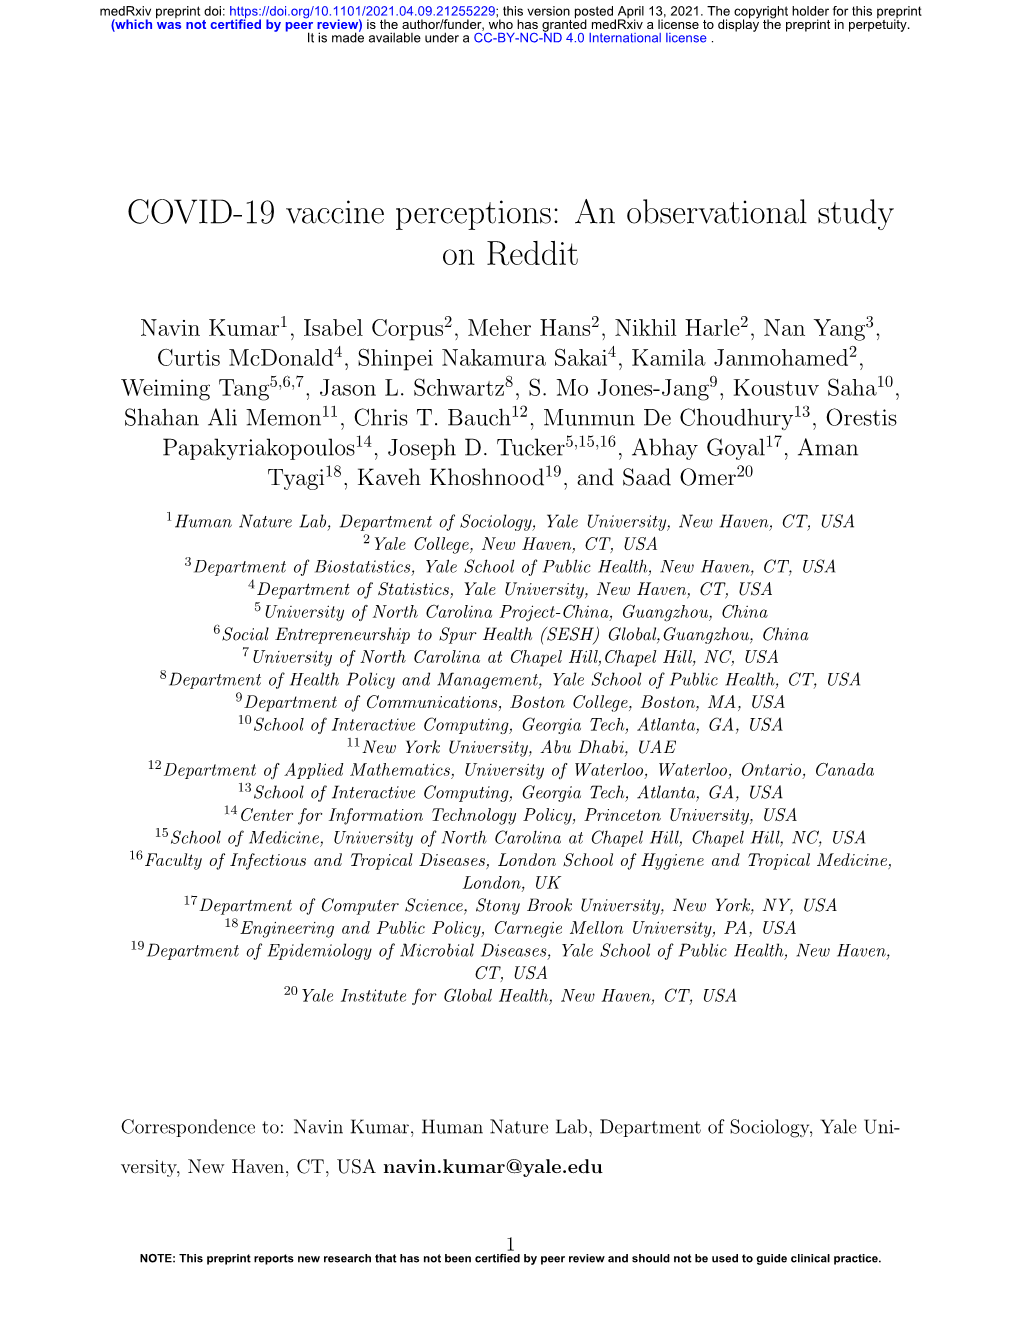 COVID-19 Vaccine Perceptions: an Observational Study on Reddit